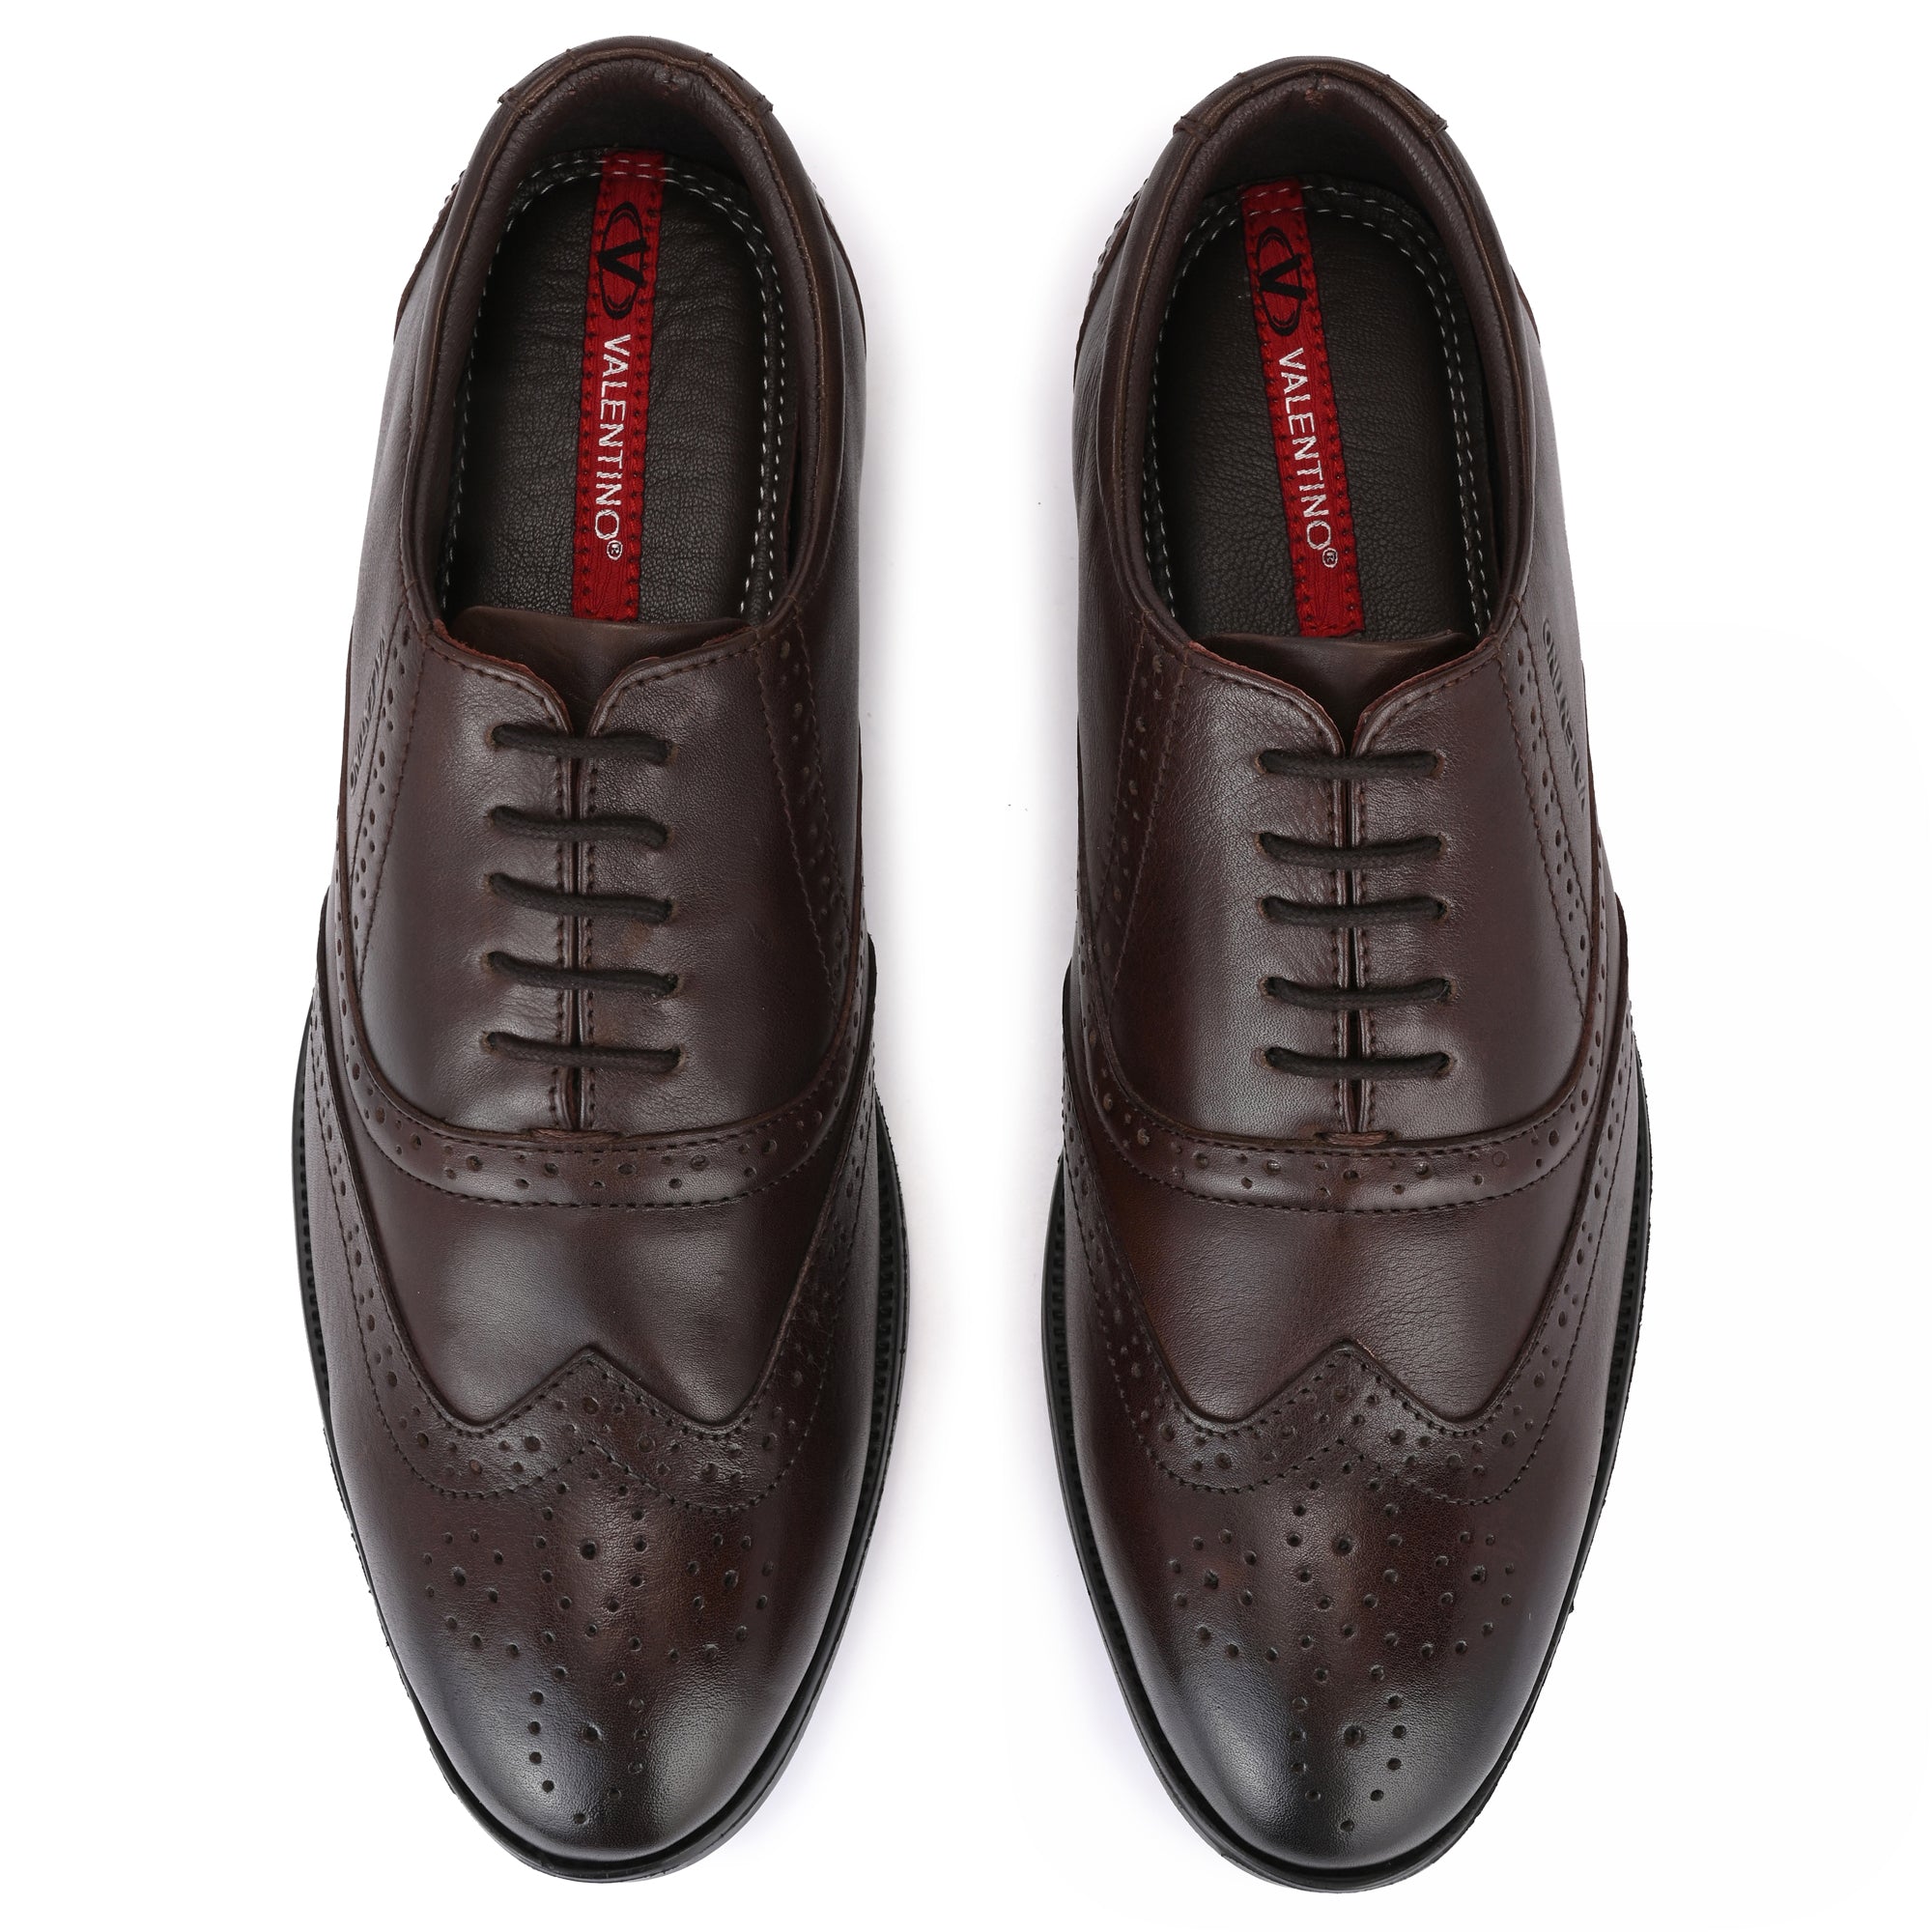 COSMO-70 MEN LEATHER BROWN FORMAL LACE UP DERBY